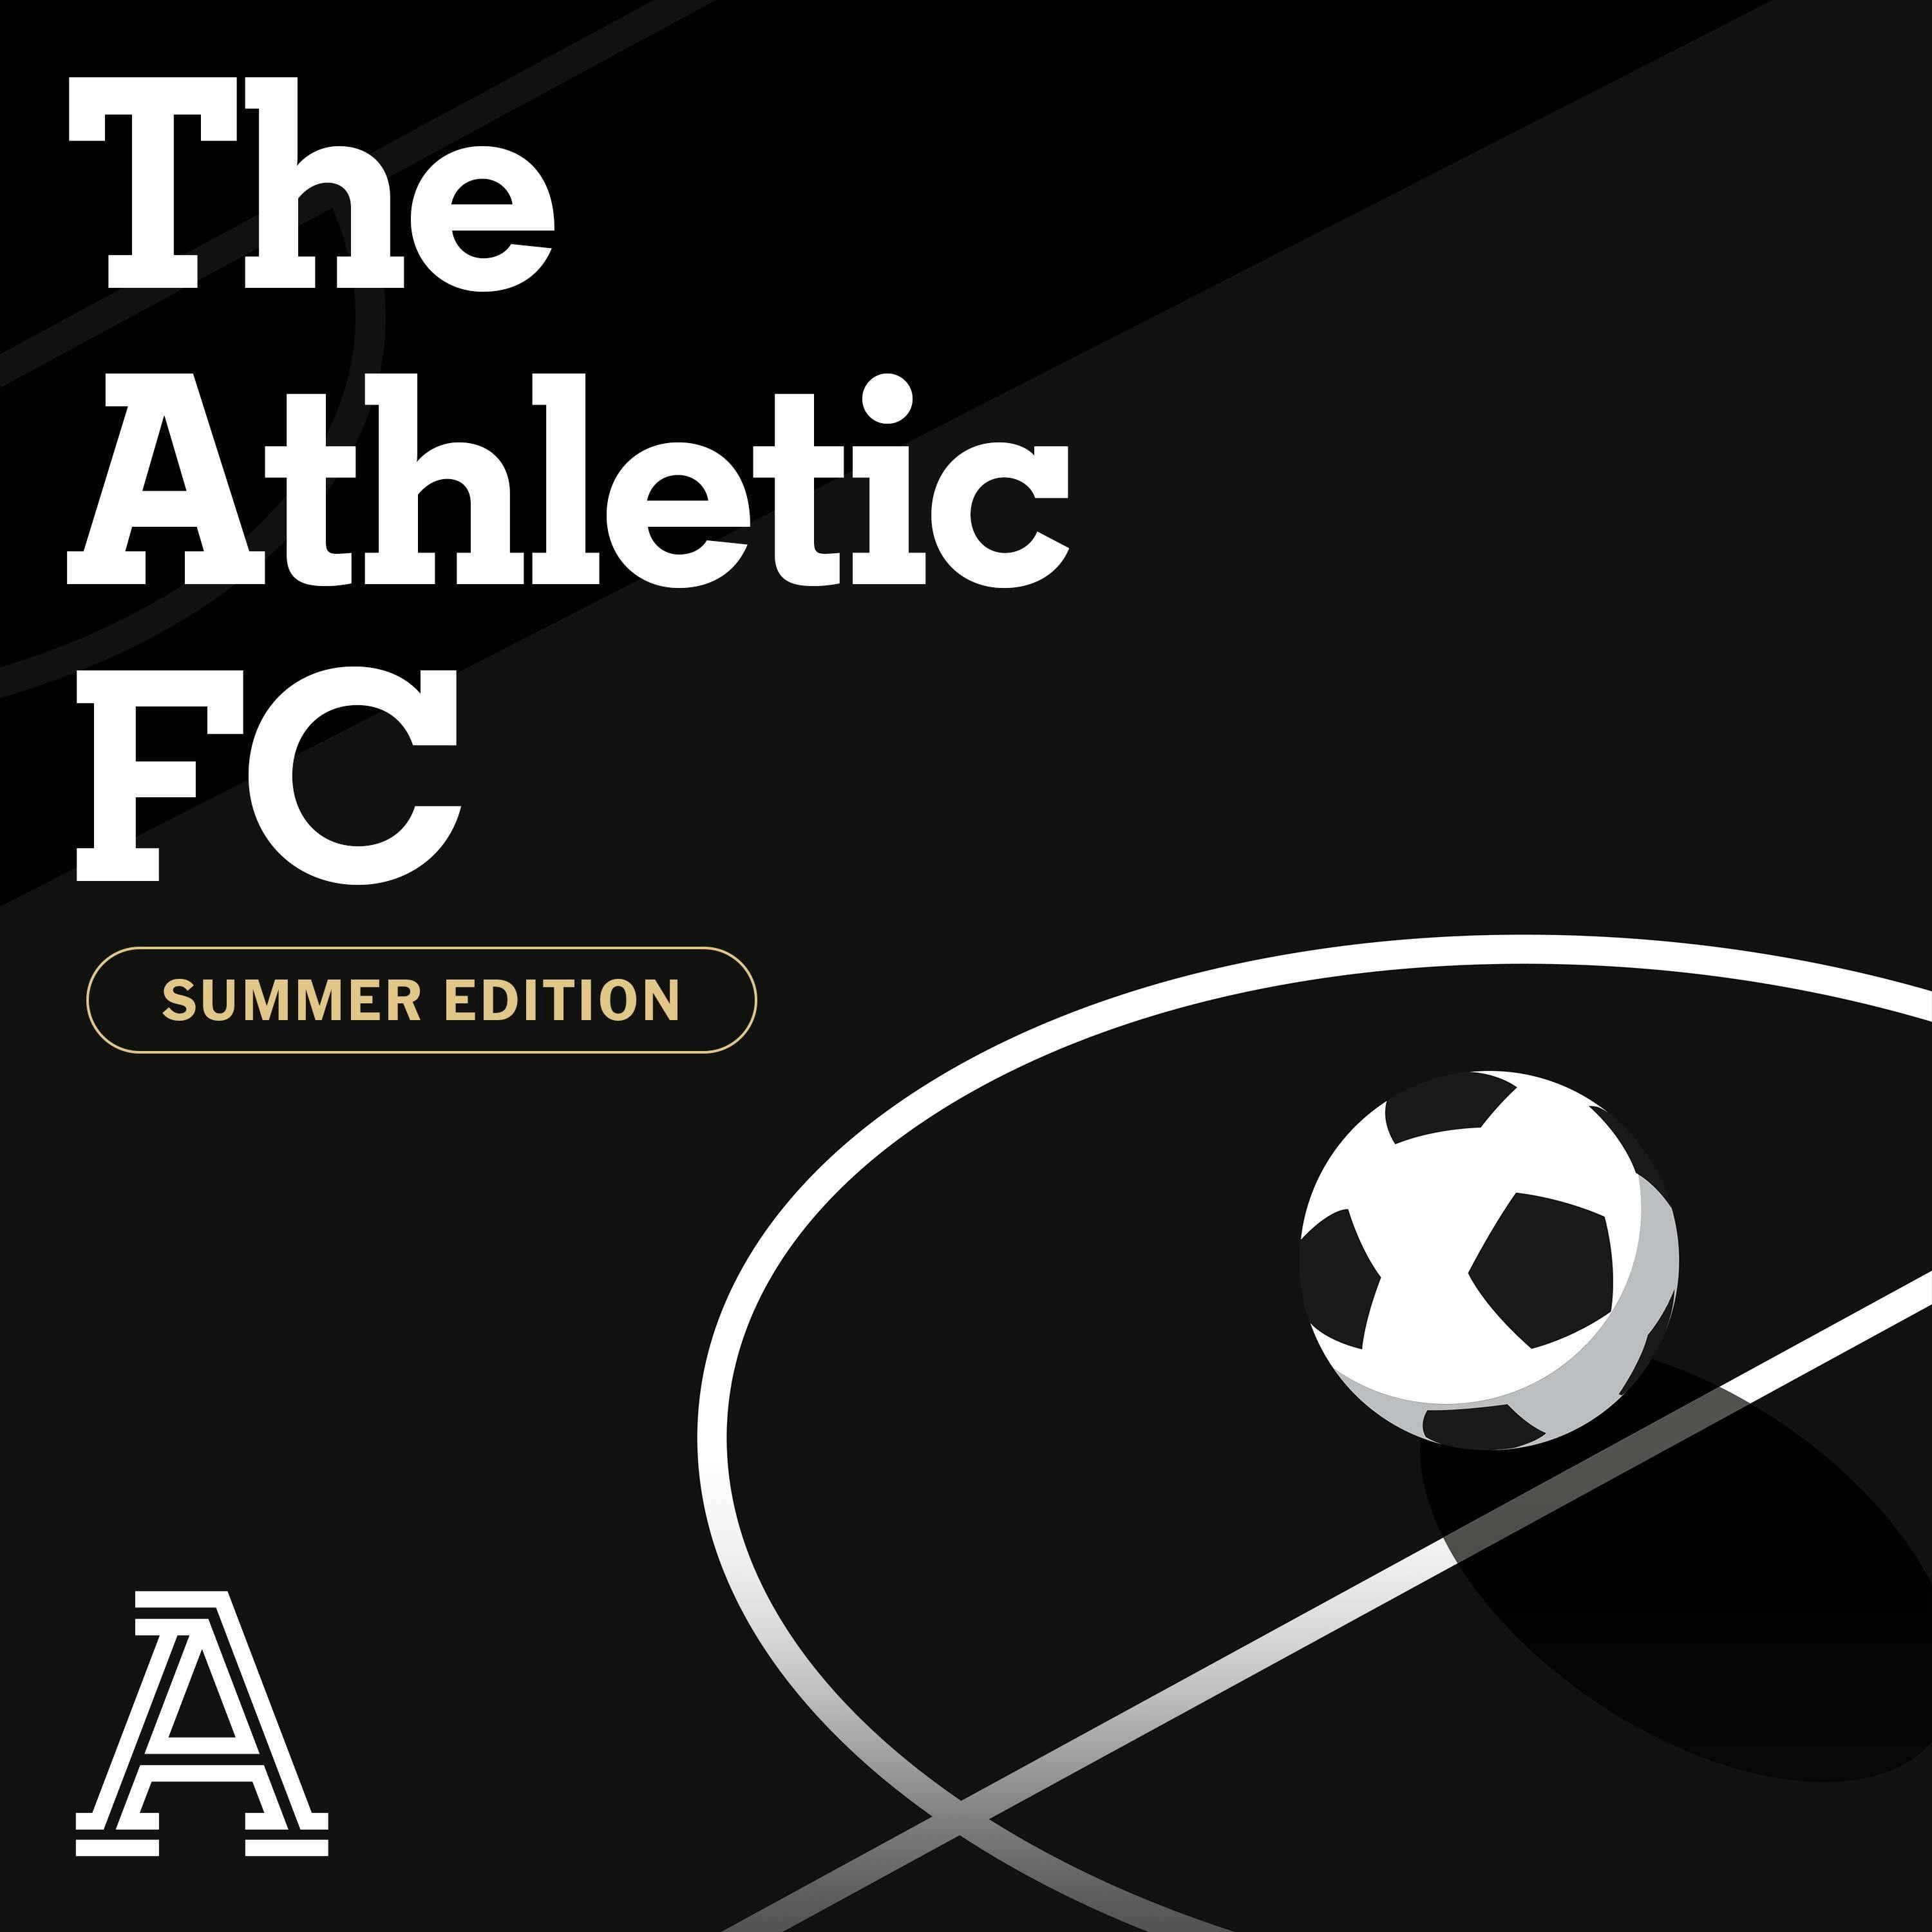 The Athletic FC Podcast podcast show image